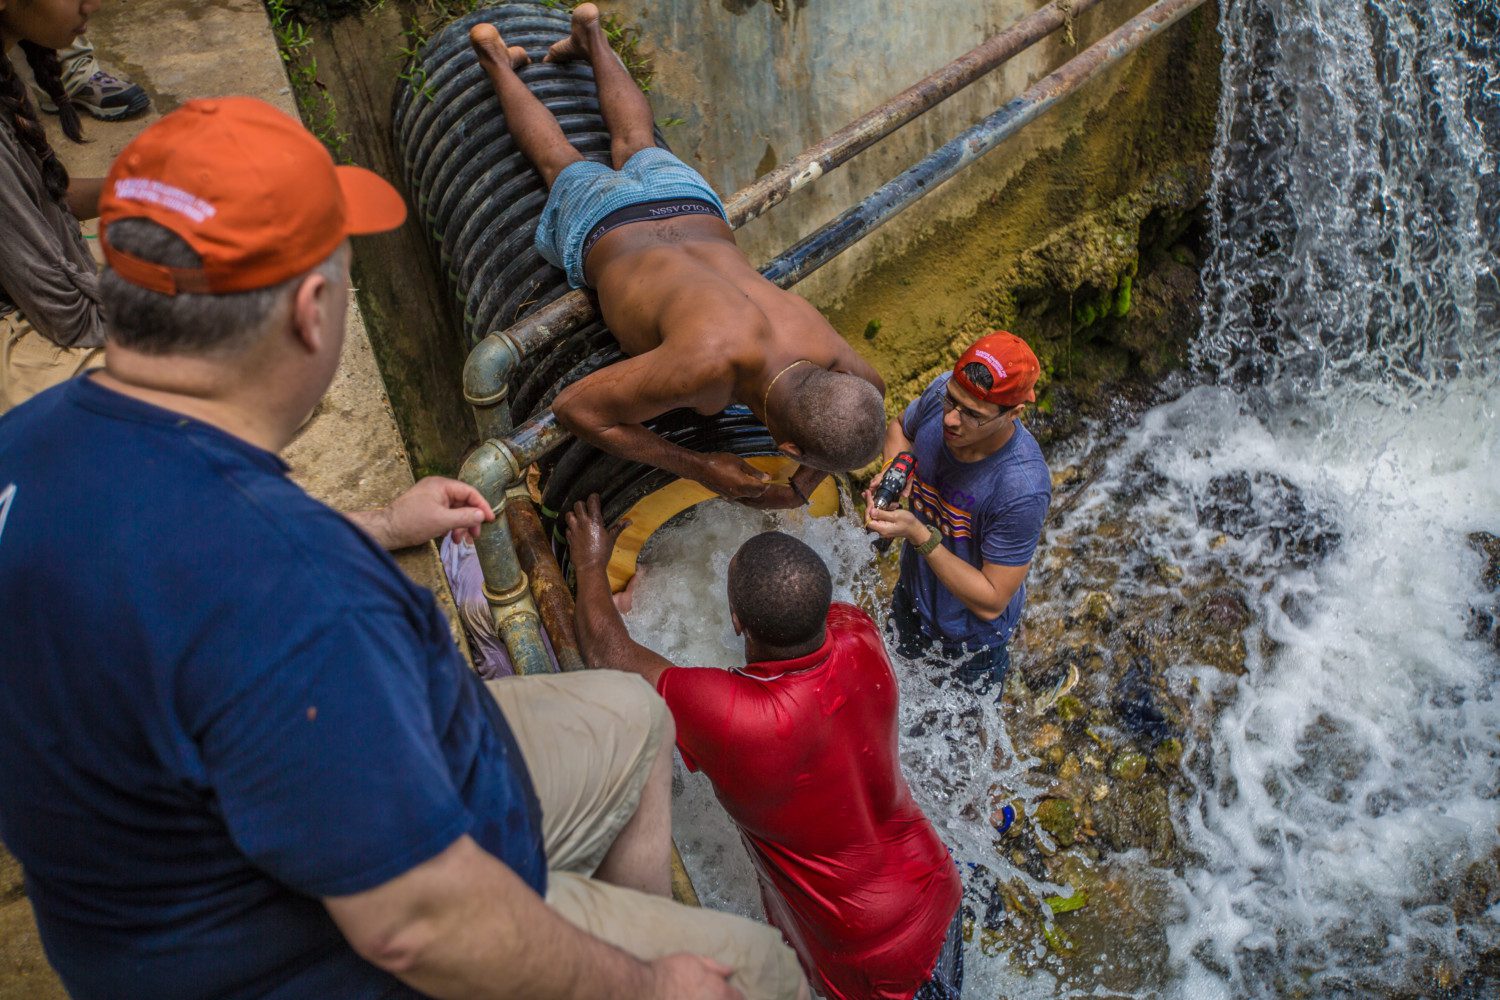 Clemson University students help provide clean water to Haitians. In this photo, the students stand in water while working on a pipe.